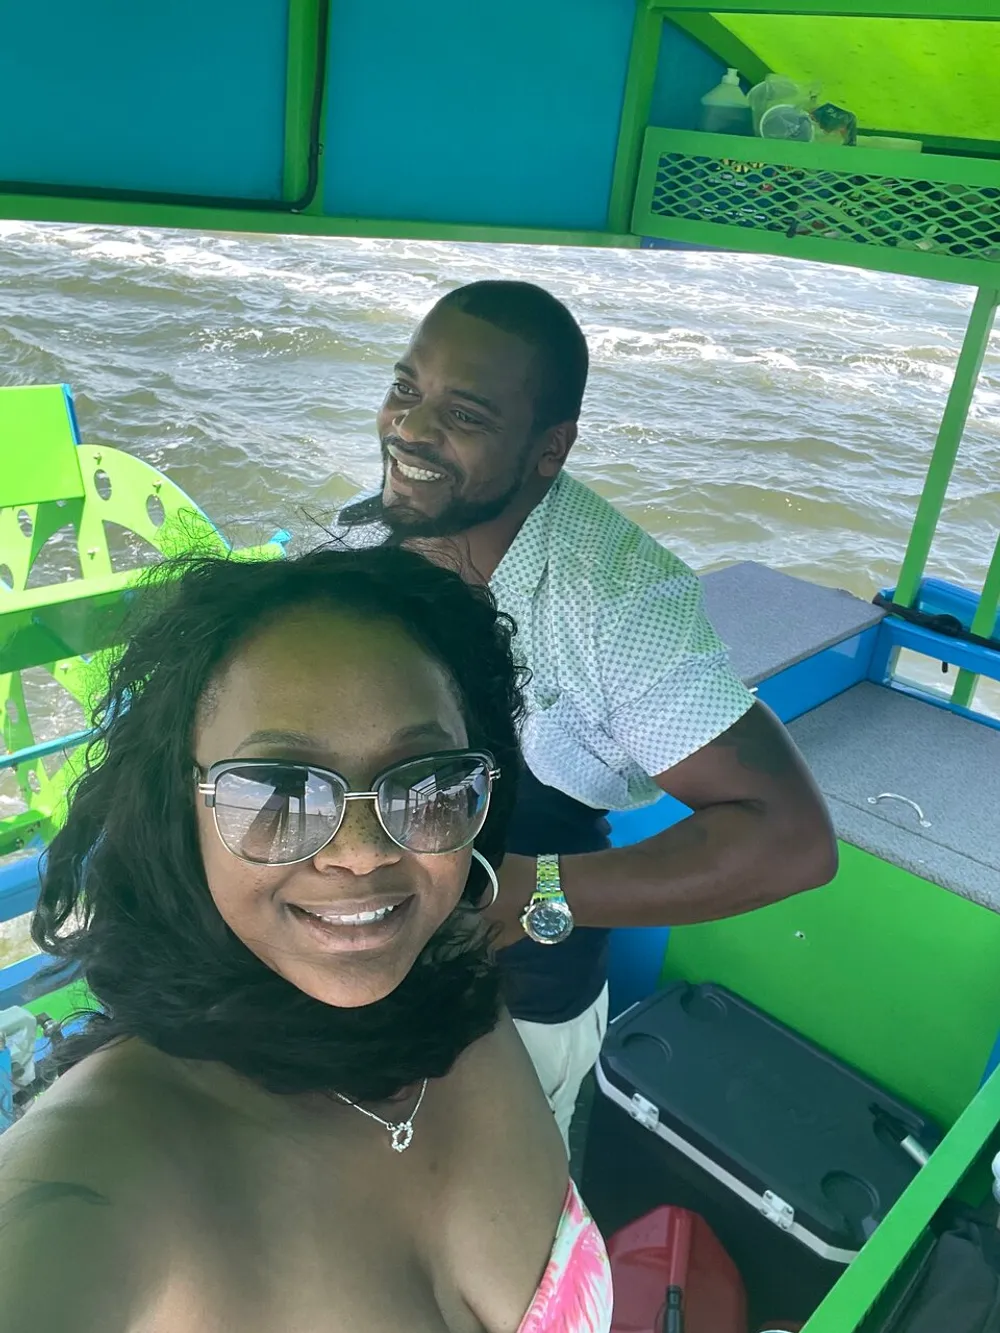 A woman is taking a selfie with a smiling man standing behind her on a boat with vibrant green trim and choppy water in the background